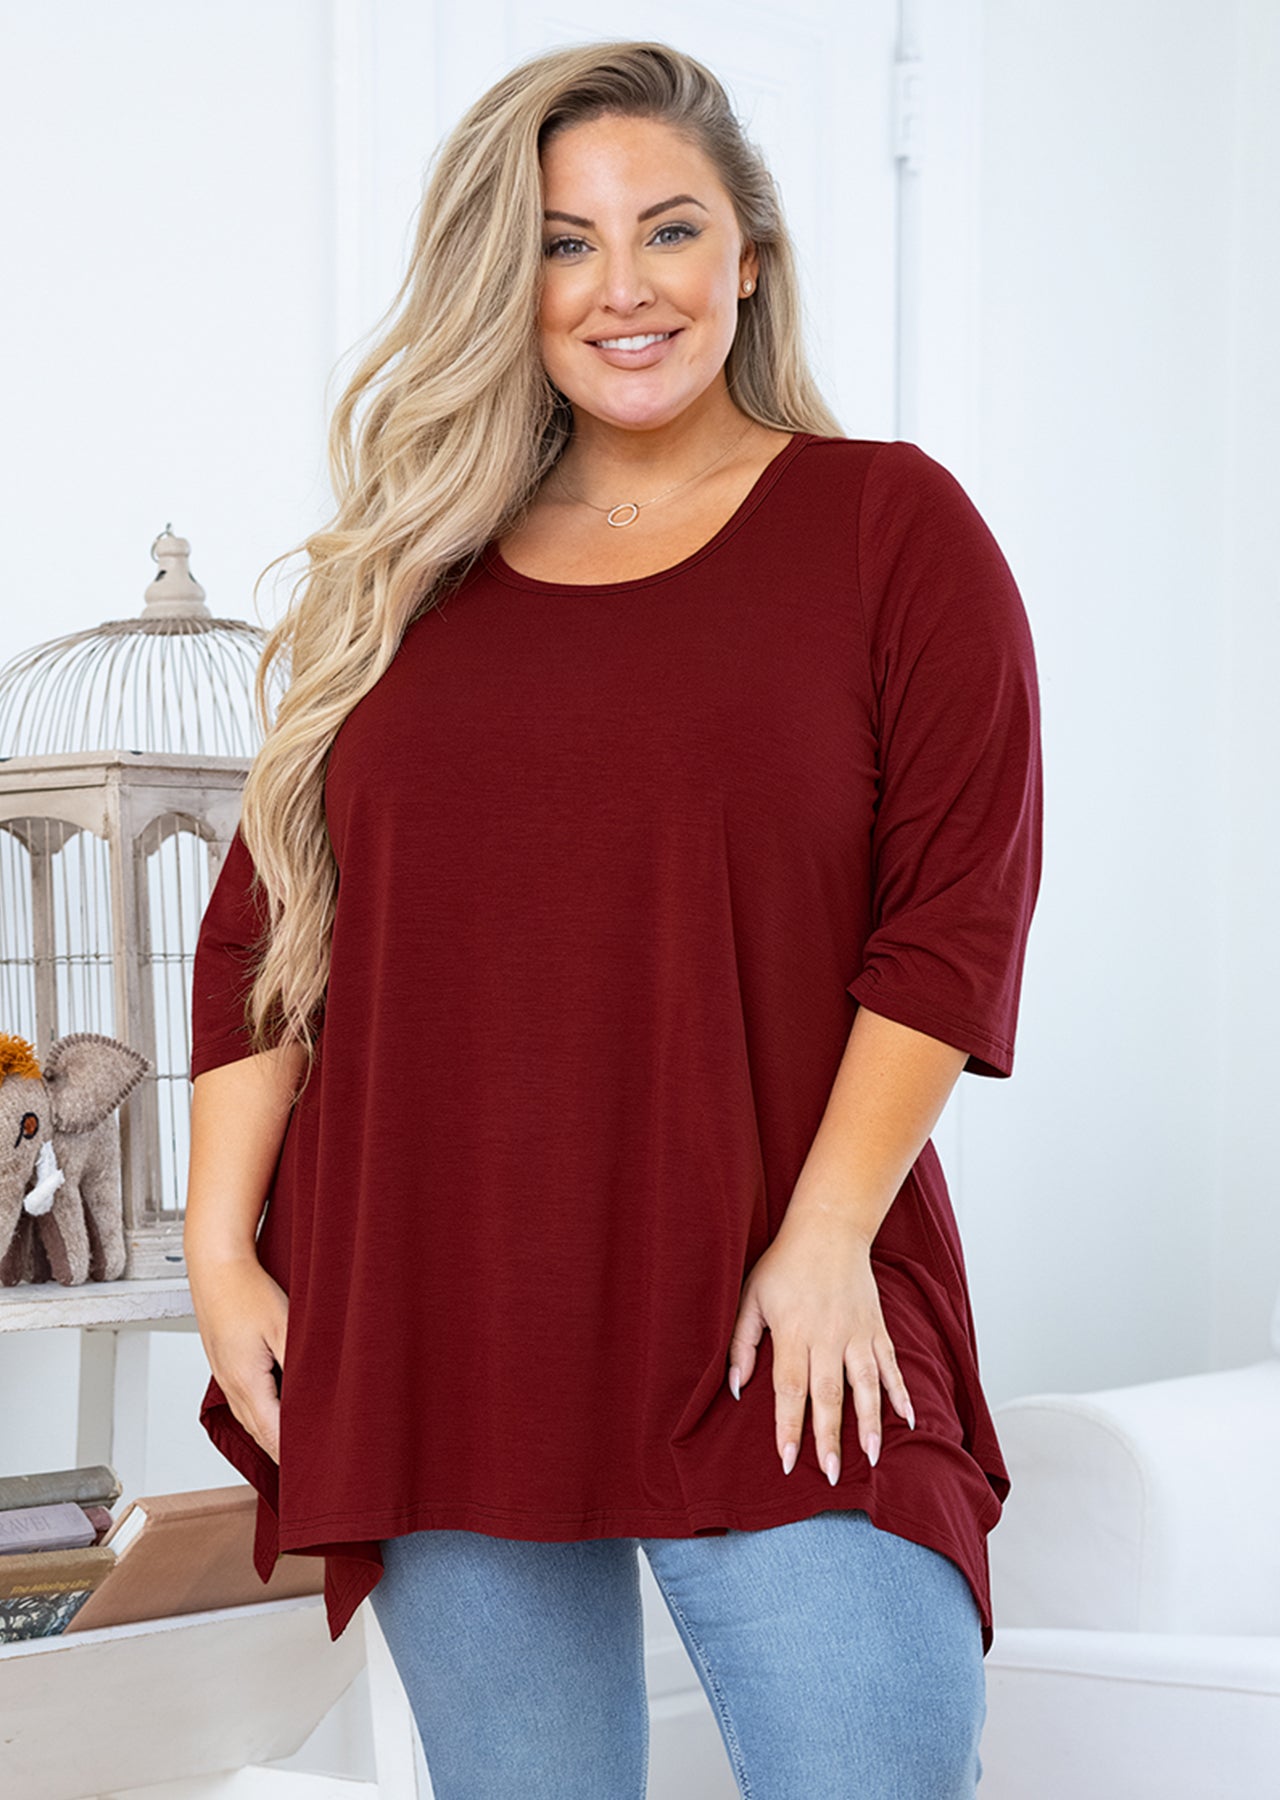 SHOWMALL Women's Plus Size 3/4 Sleeve Swing Tunic Top - Wine Red / 1X